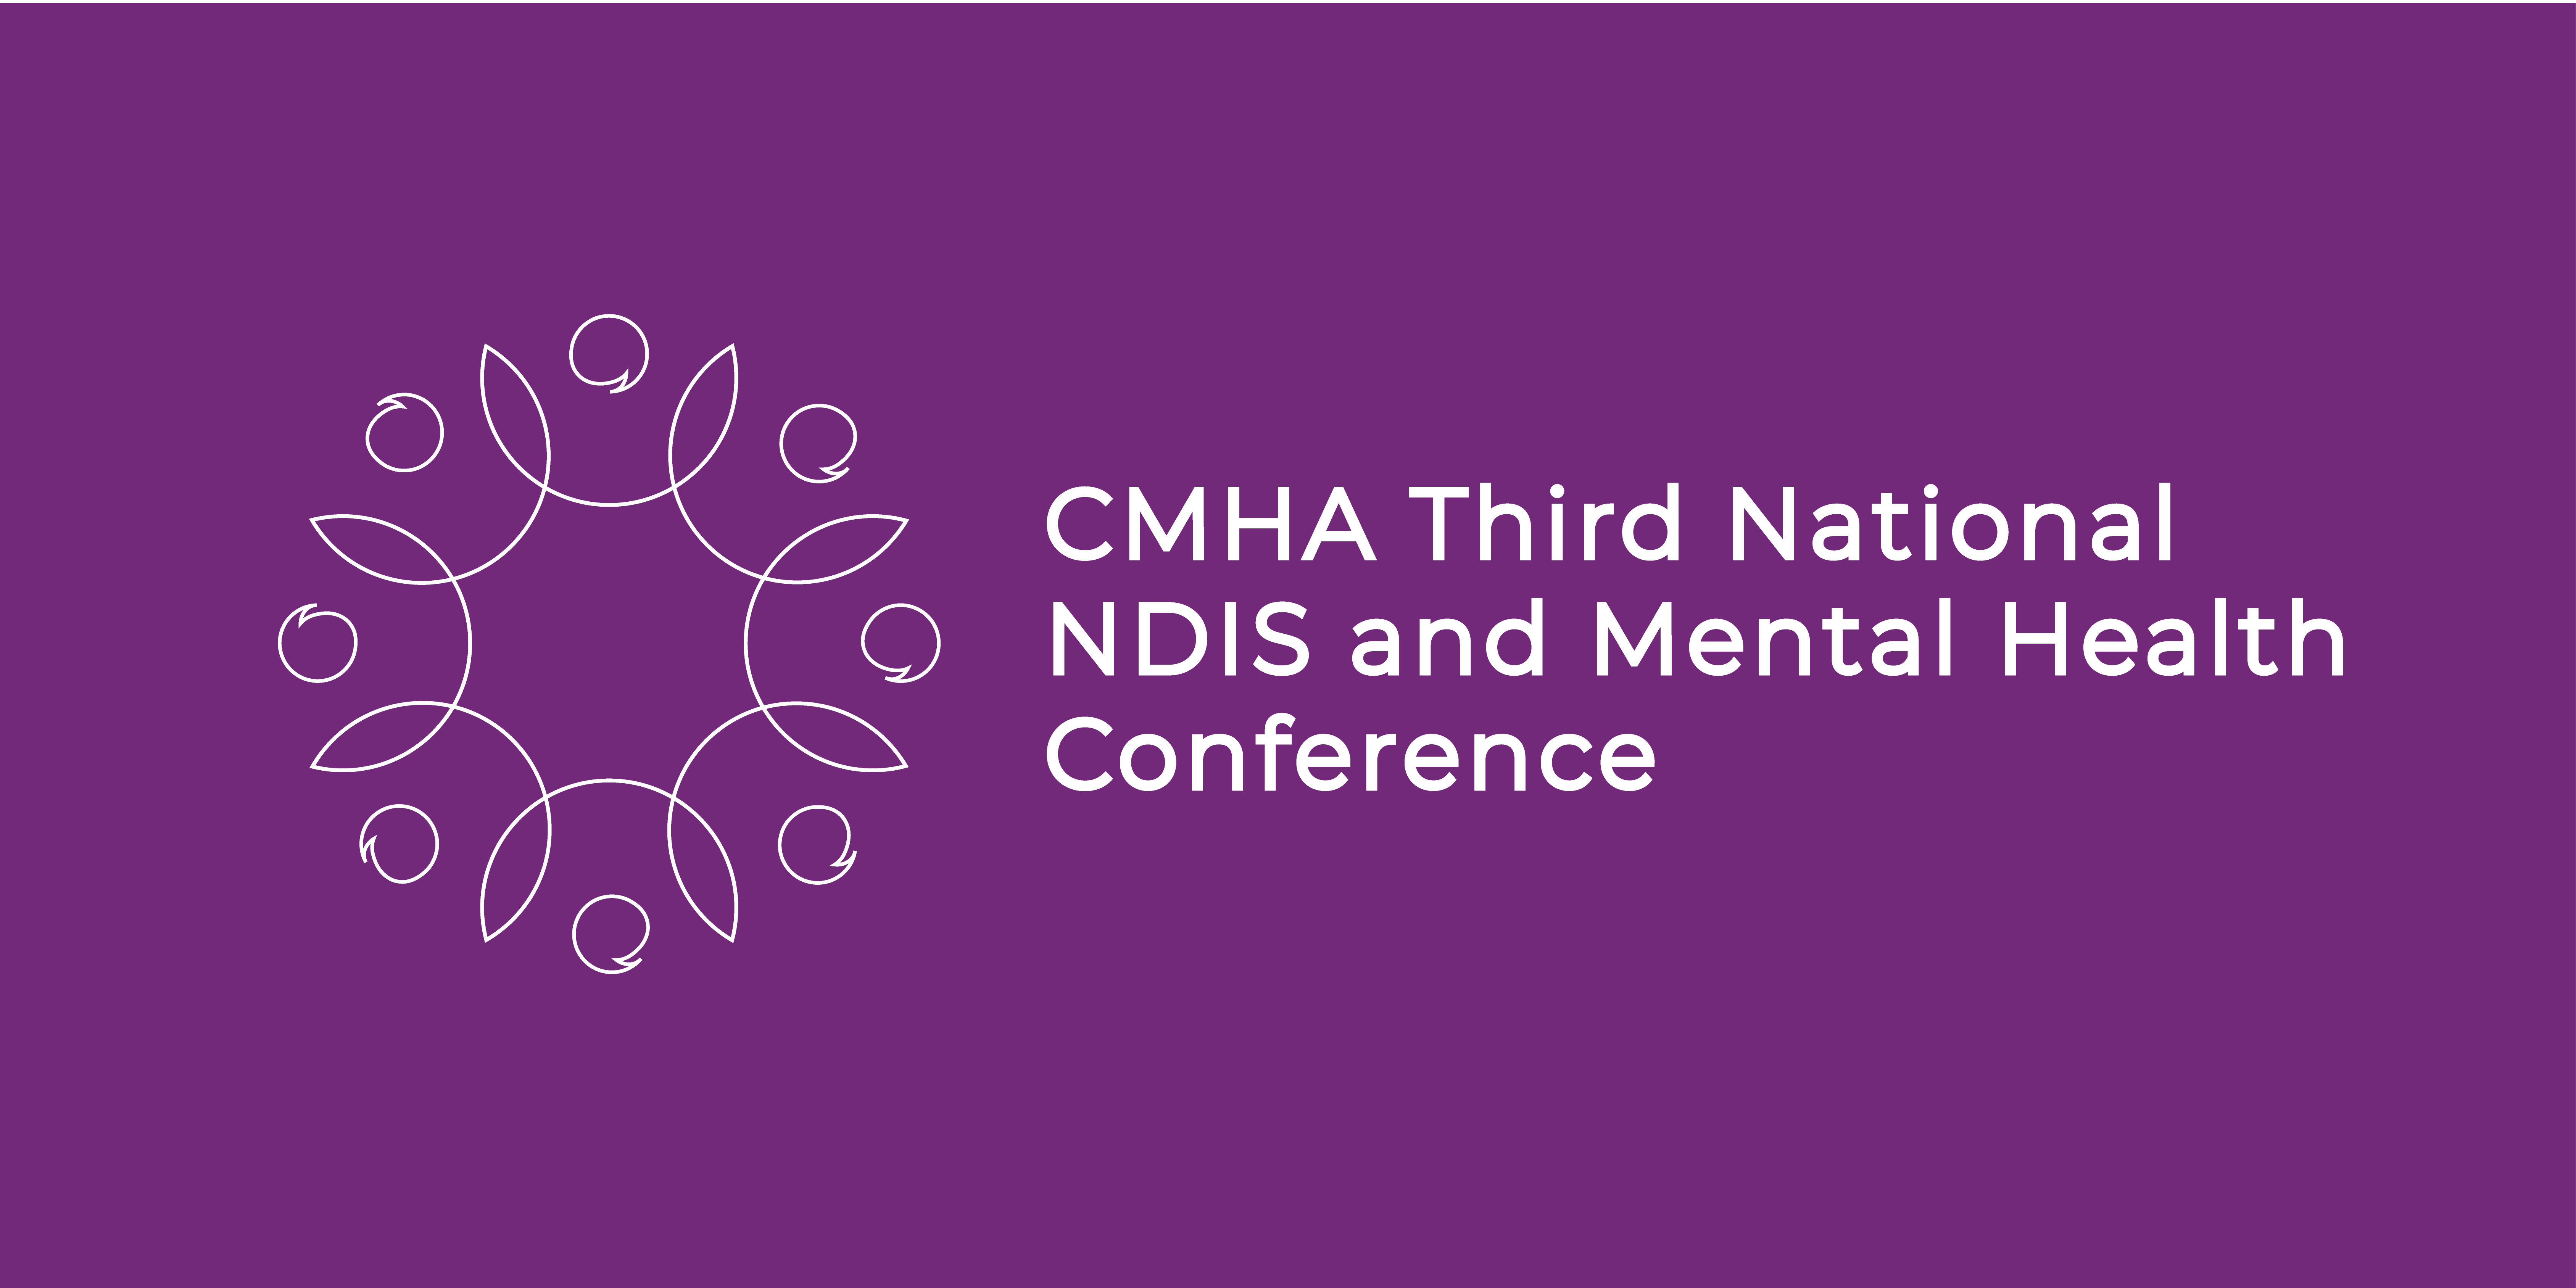 CMHA - Third National NDIS and Mental Health Conference